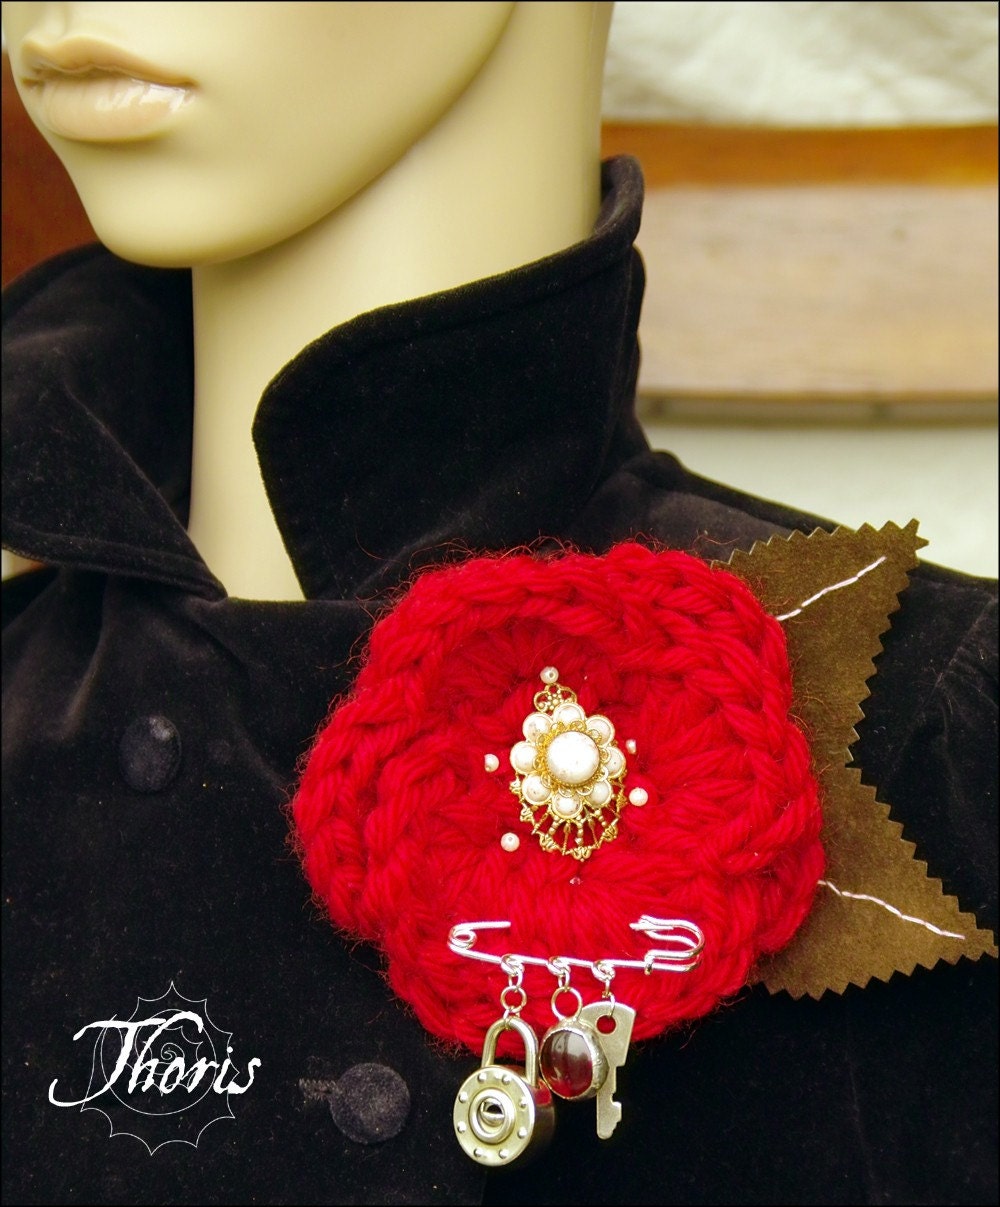 Key to the Rose Garden - Crochet Red Rose Brooch by Thoris Designs on Etsy